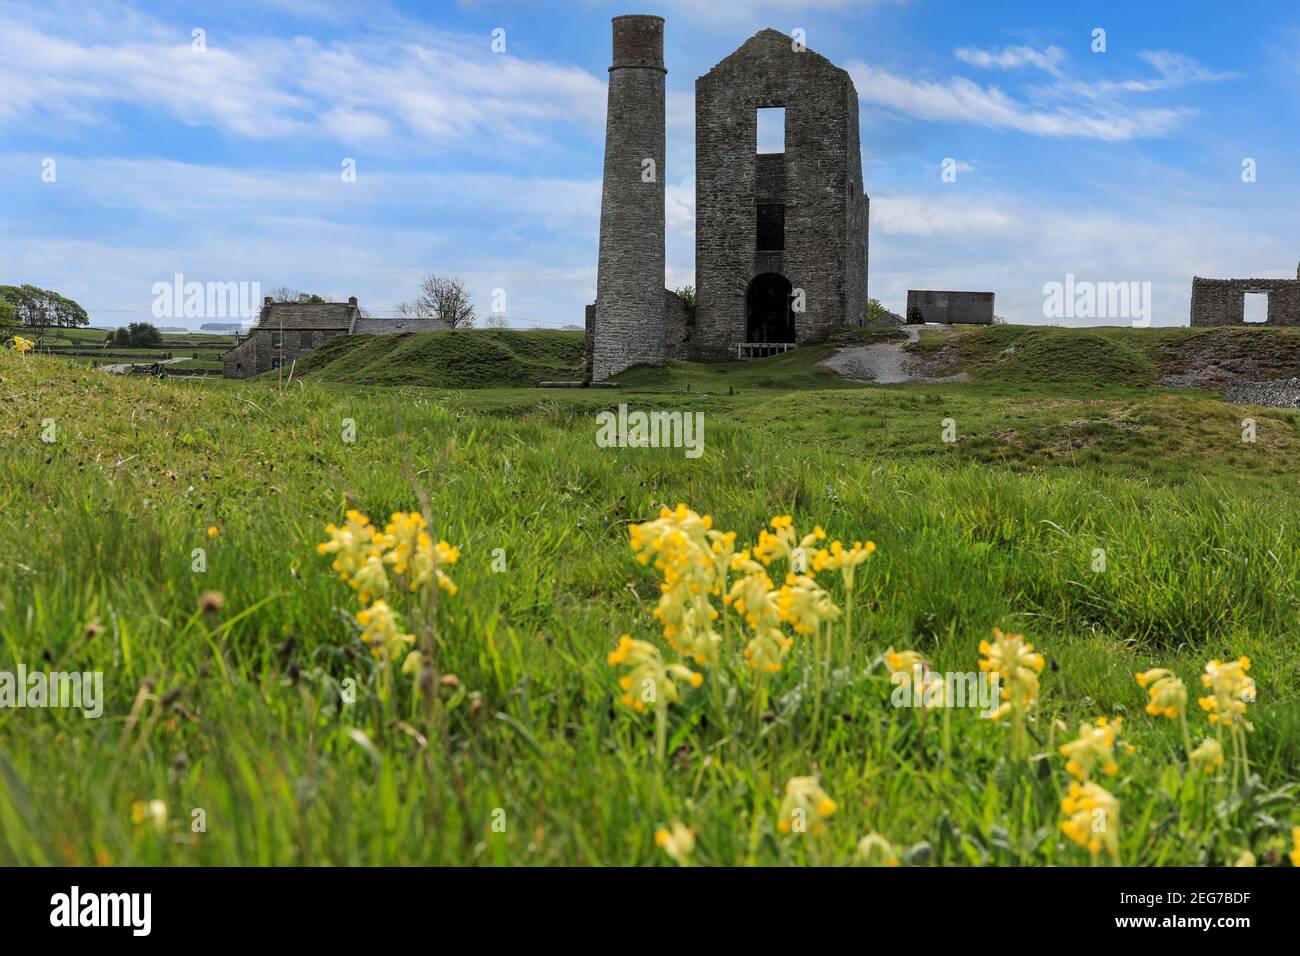 Wild cowslip flowers in front of the Engine House at the Magpie Mine, a well-preserved disused lead mine, Sheldon, Derbyshire, England, UK Stock Photo